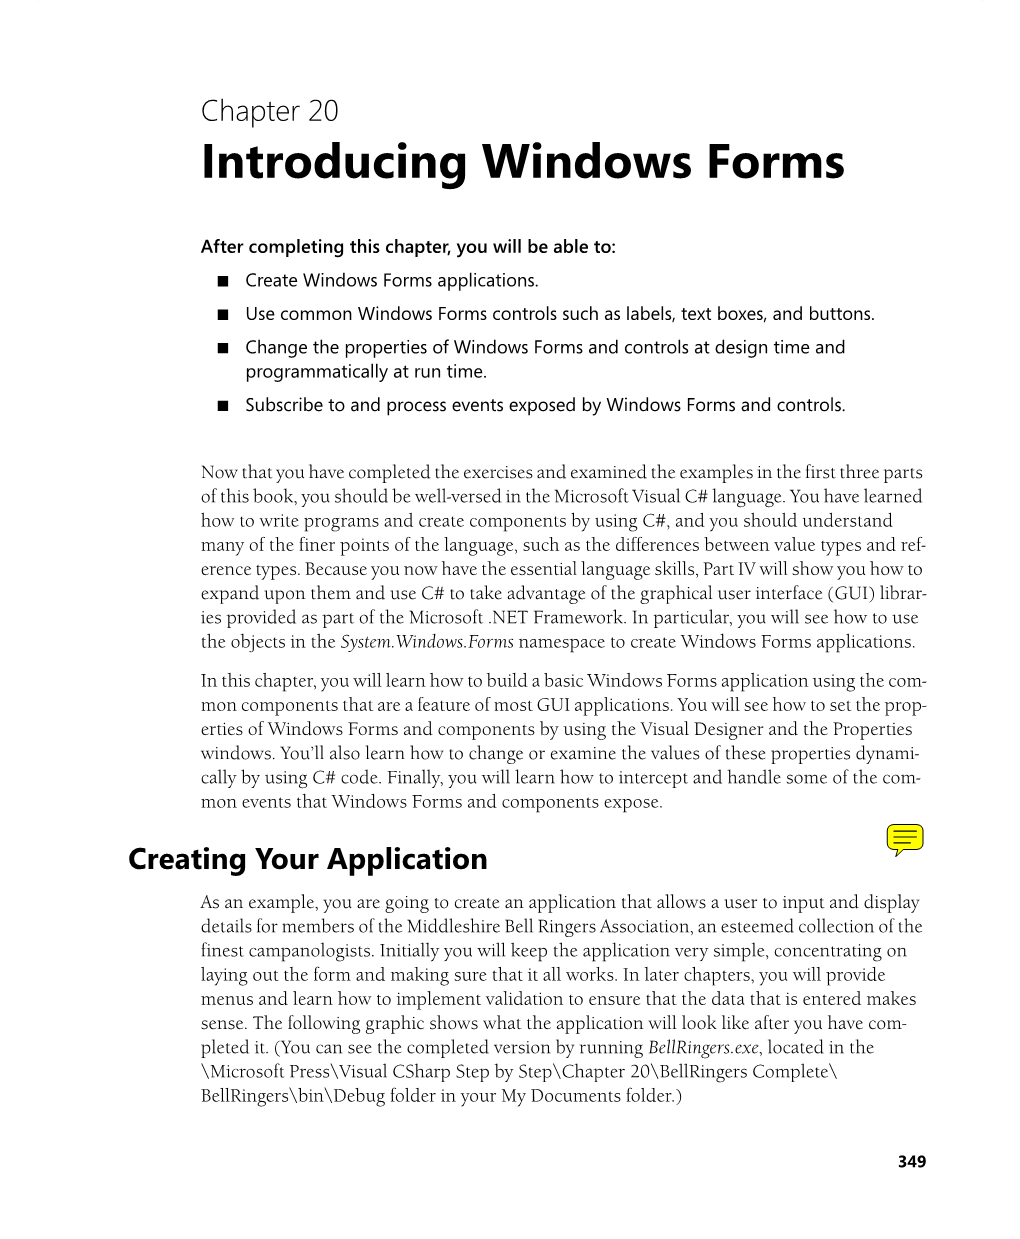 Introducing Windows Forms